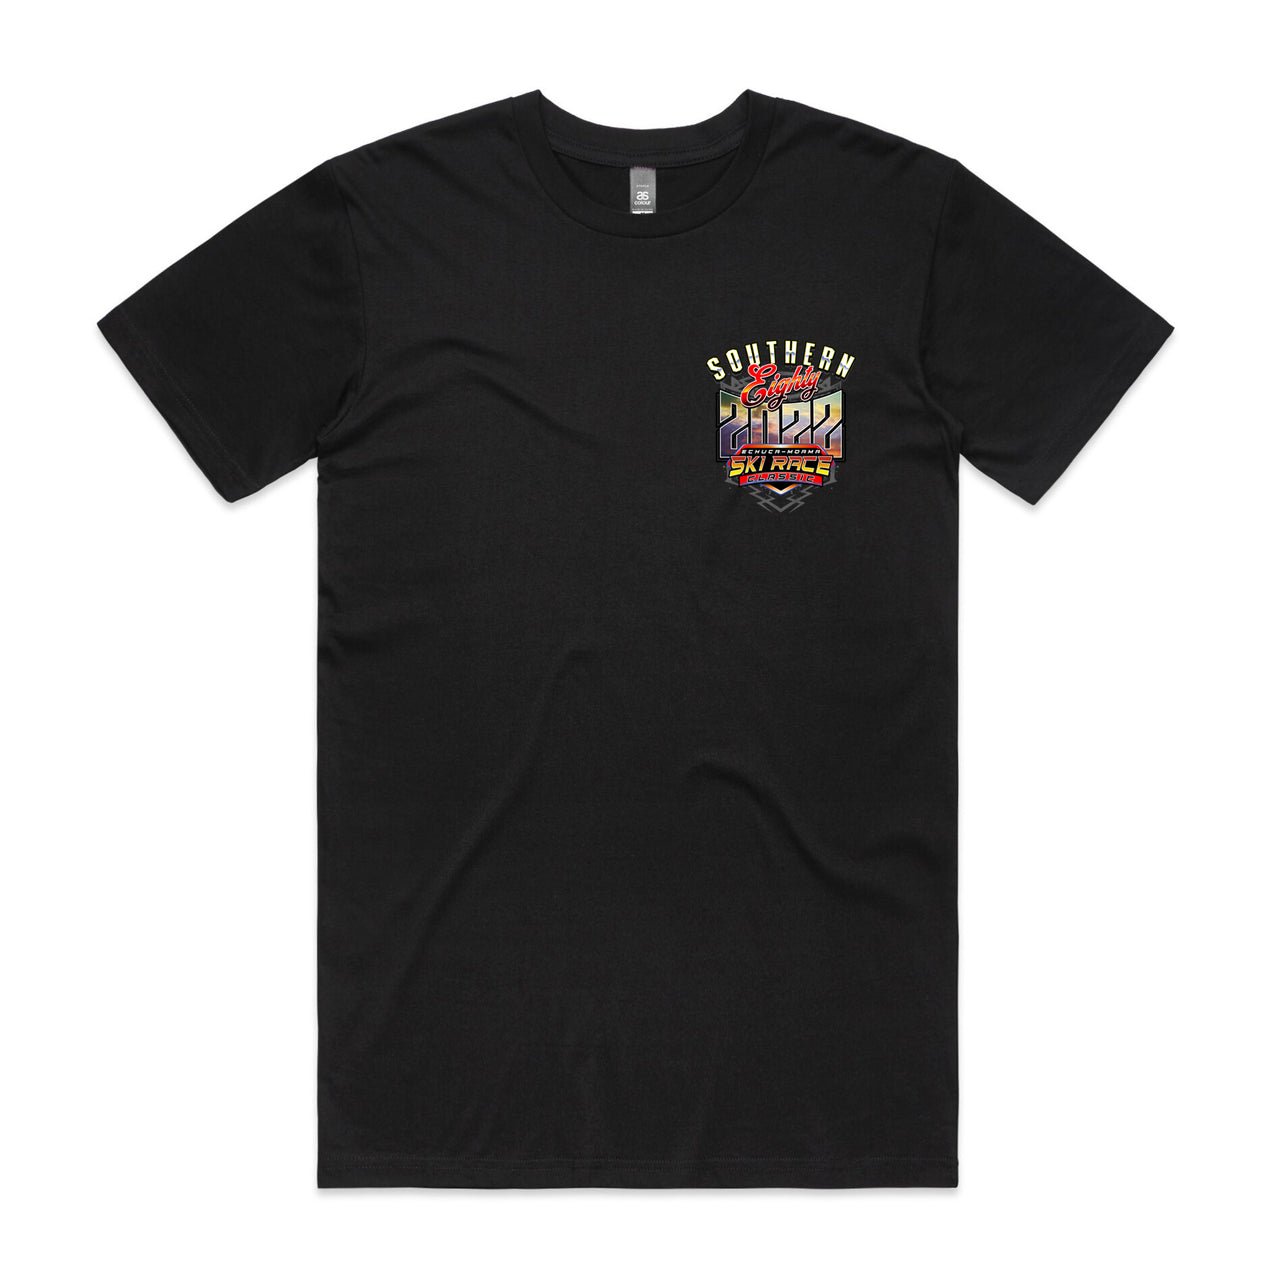 Southern 80 2022 Event Men's Tee